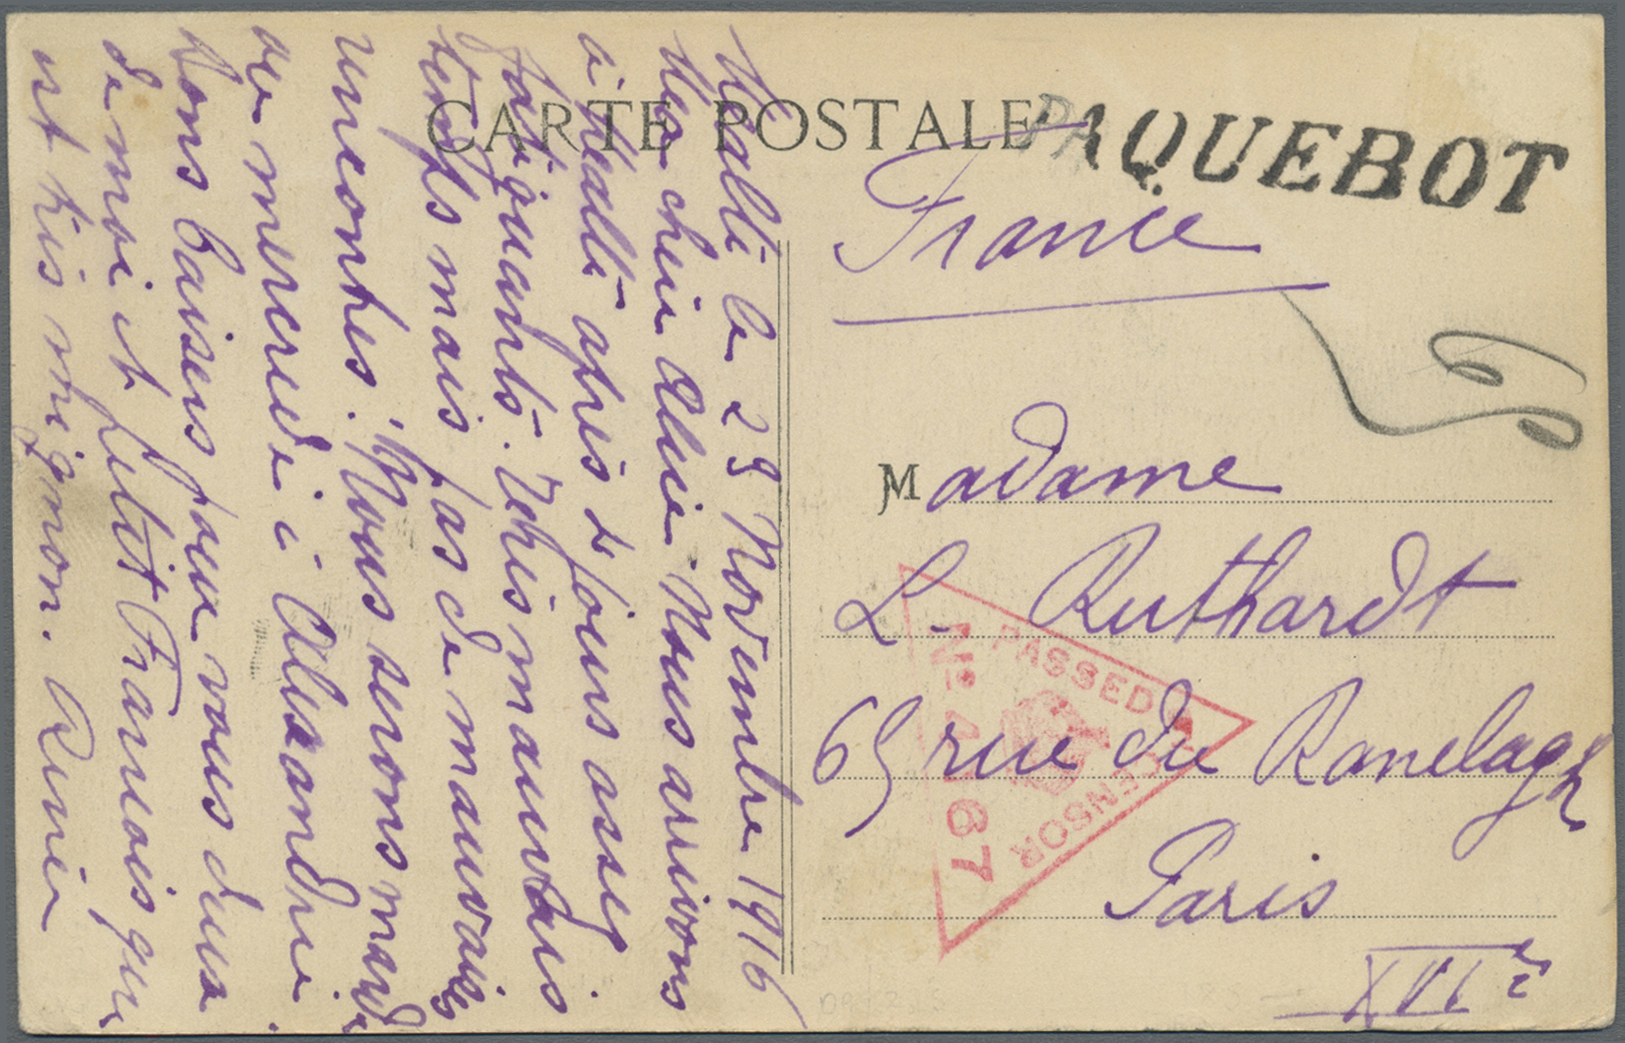 Br Malta: 1916. Picture Post Card Of The Messageries Maritimes "Mossoul" Written From Malta Addressed To France B - Malte